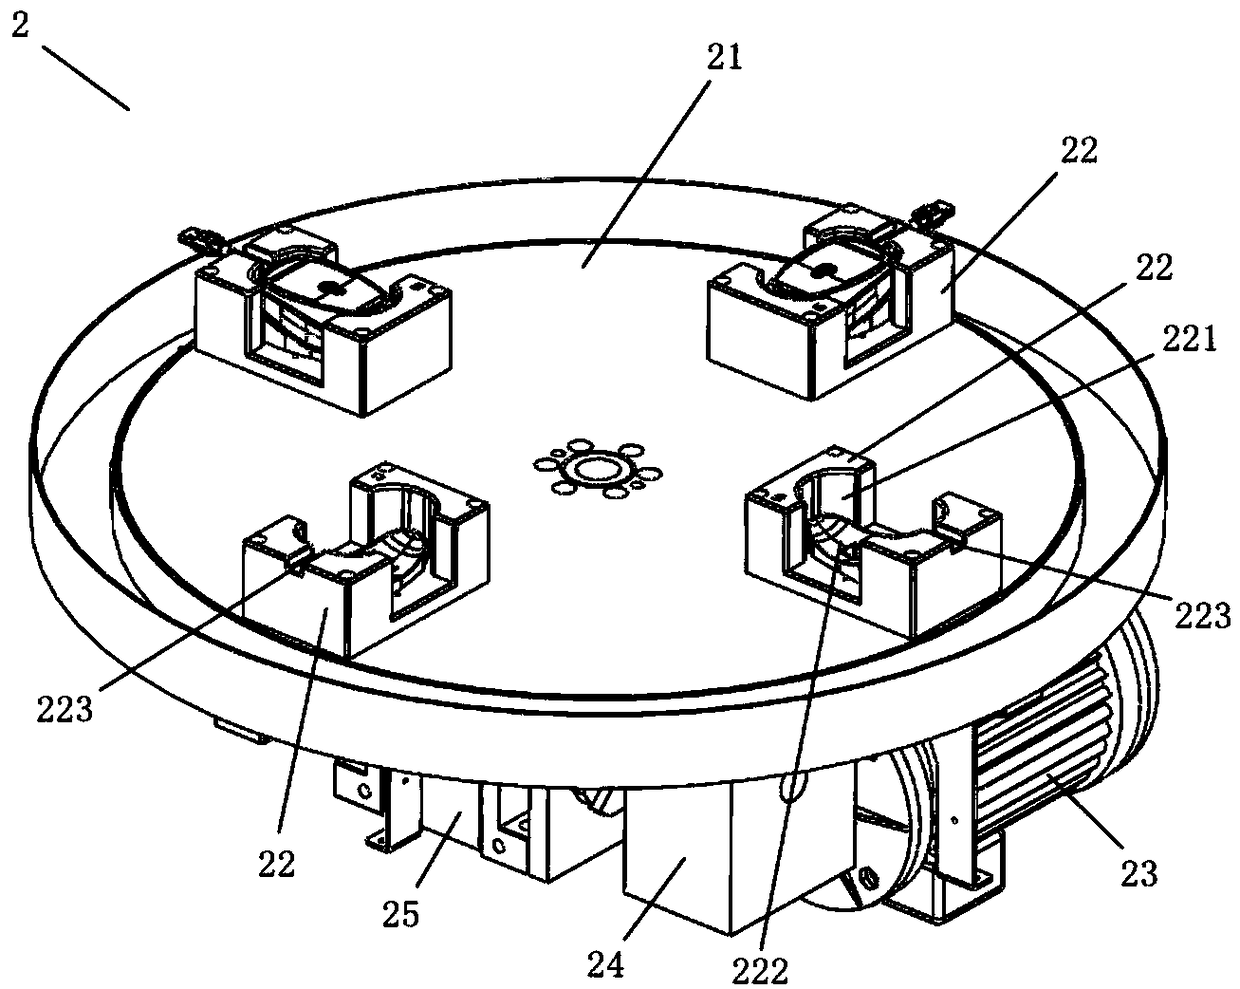 Mouse label sticking and inspection device